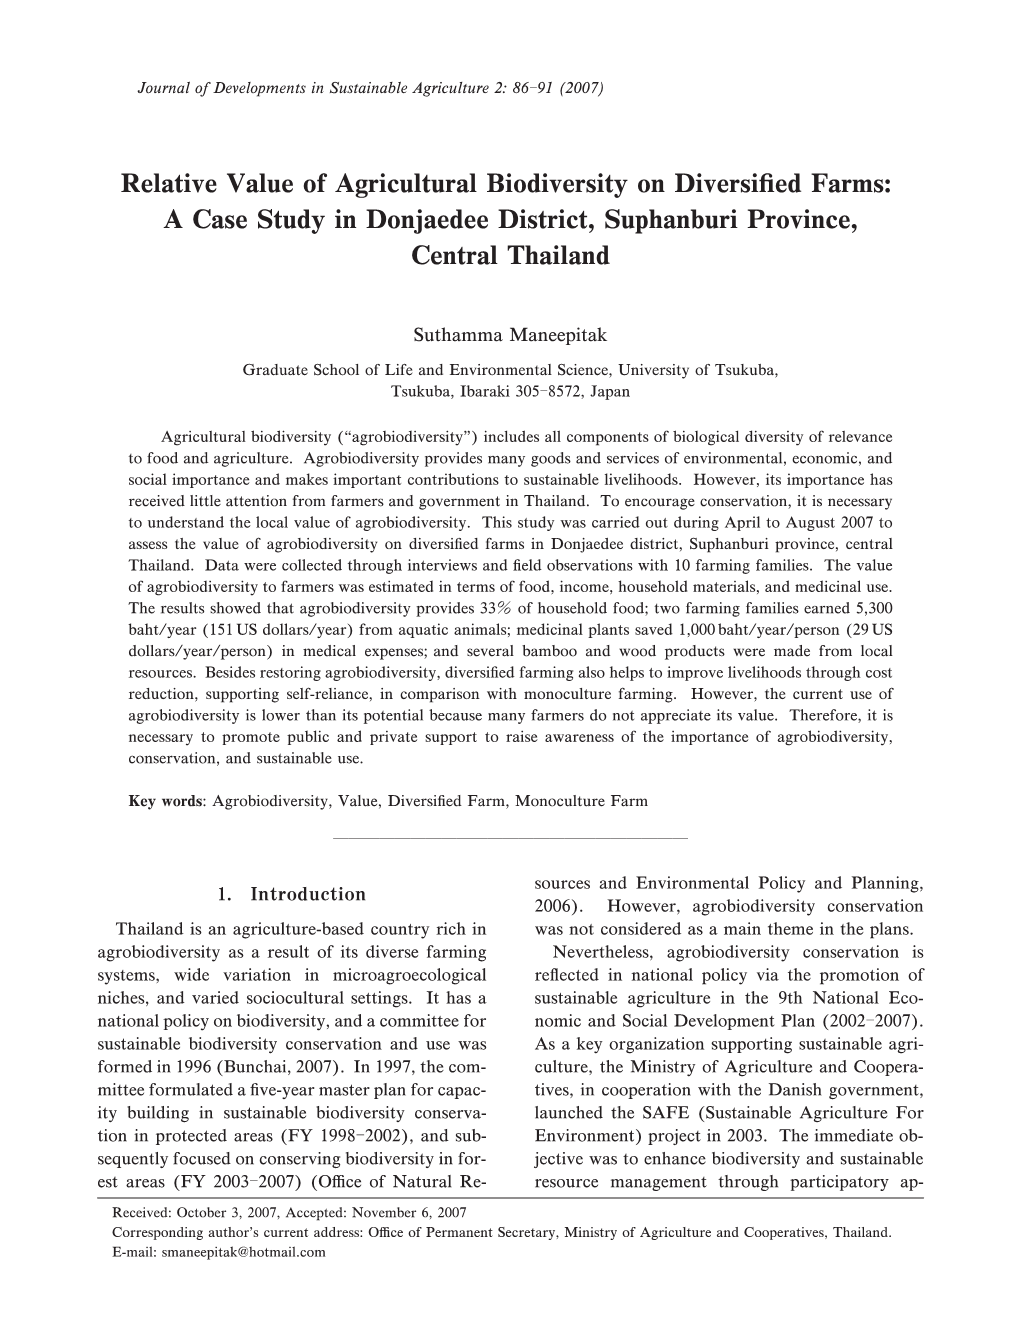 Relative Value of Agricultural Biodiversity on Diversified Farms: a Case Study in Donjaedee District, Suphanburi Province, Centr